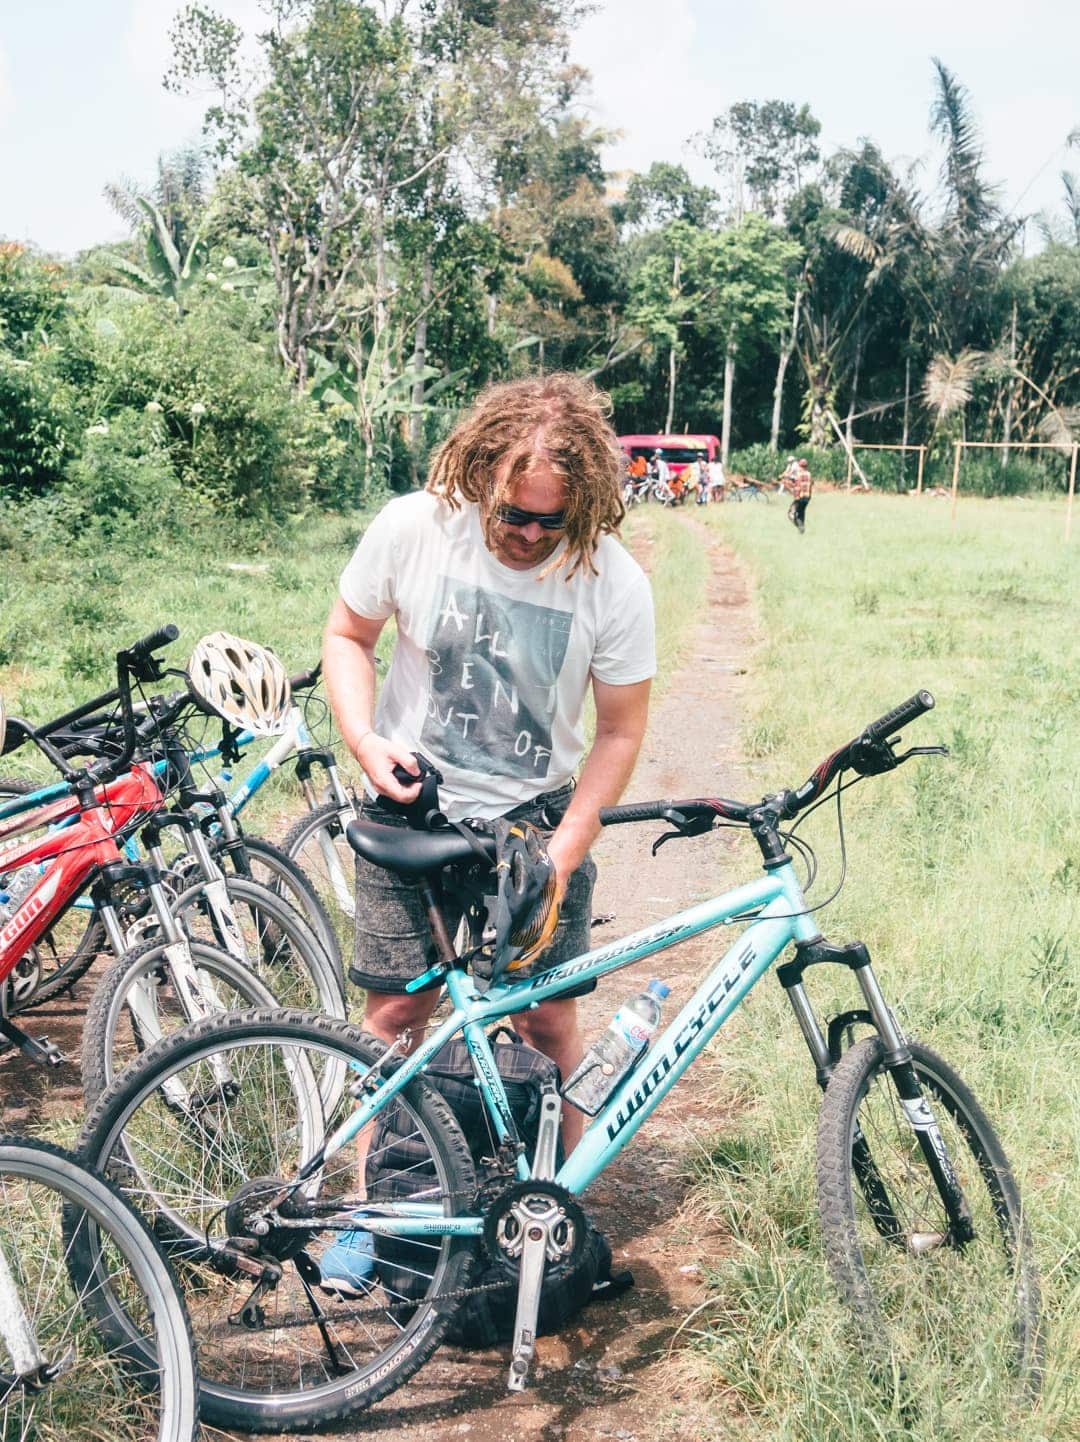 A review of Jegeg Bike Tour in Ubud - The best Bali experience